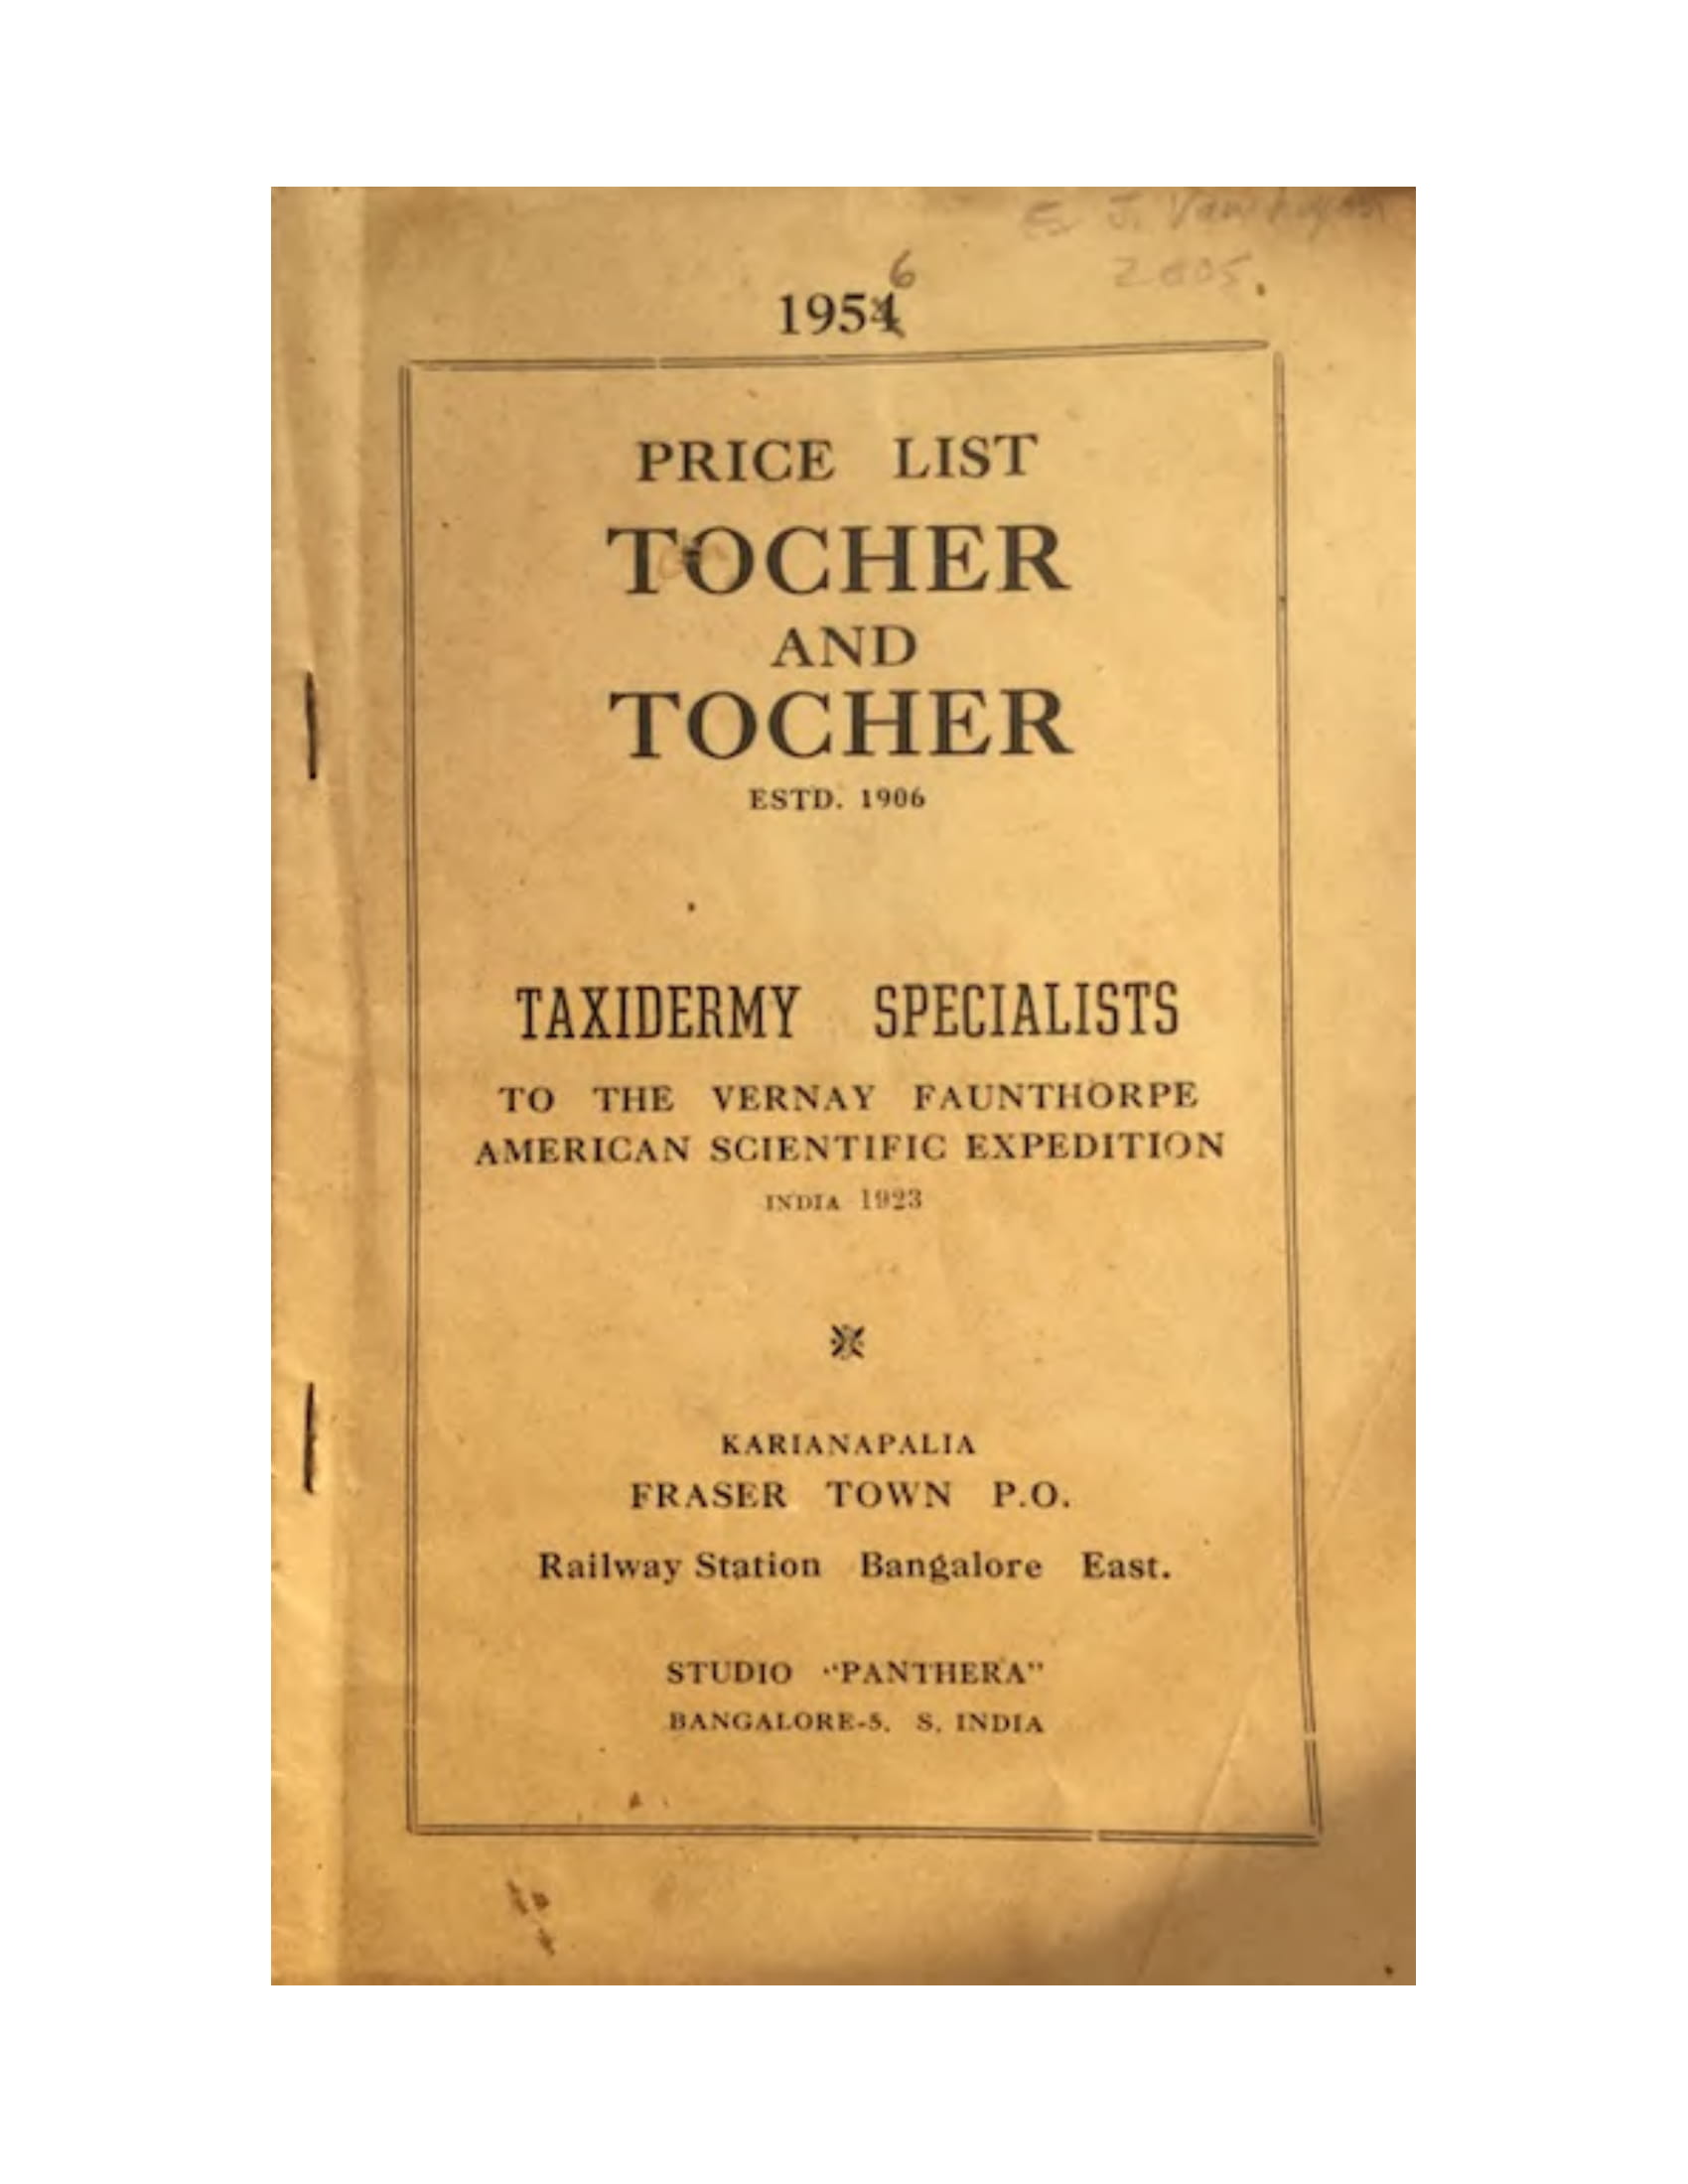 Tocher-And-Tocher-1954-01.jpg